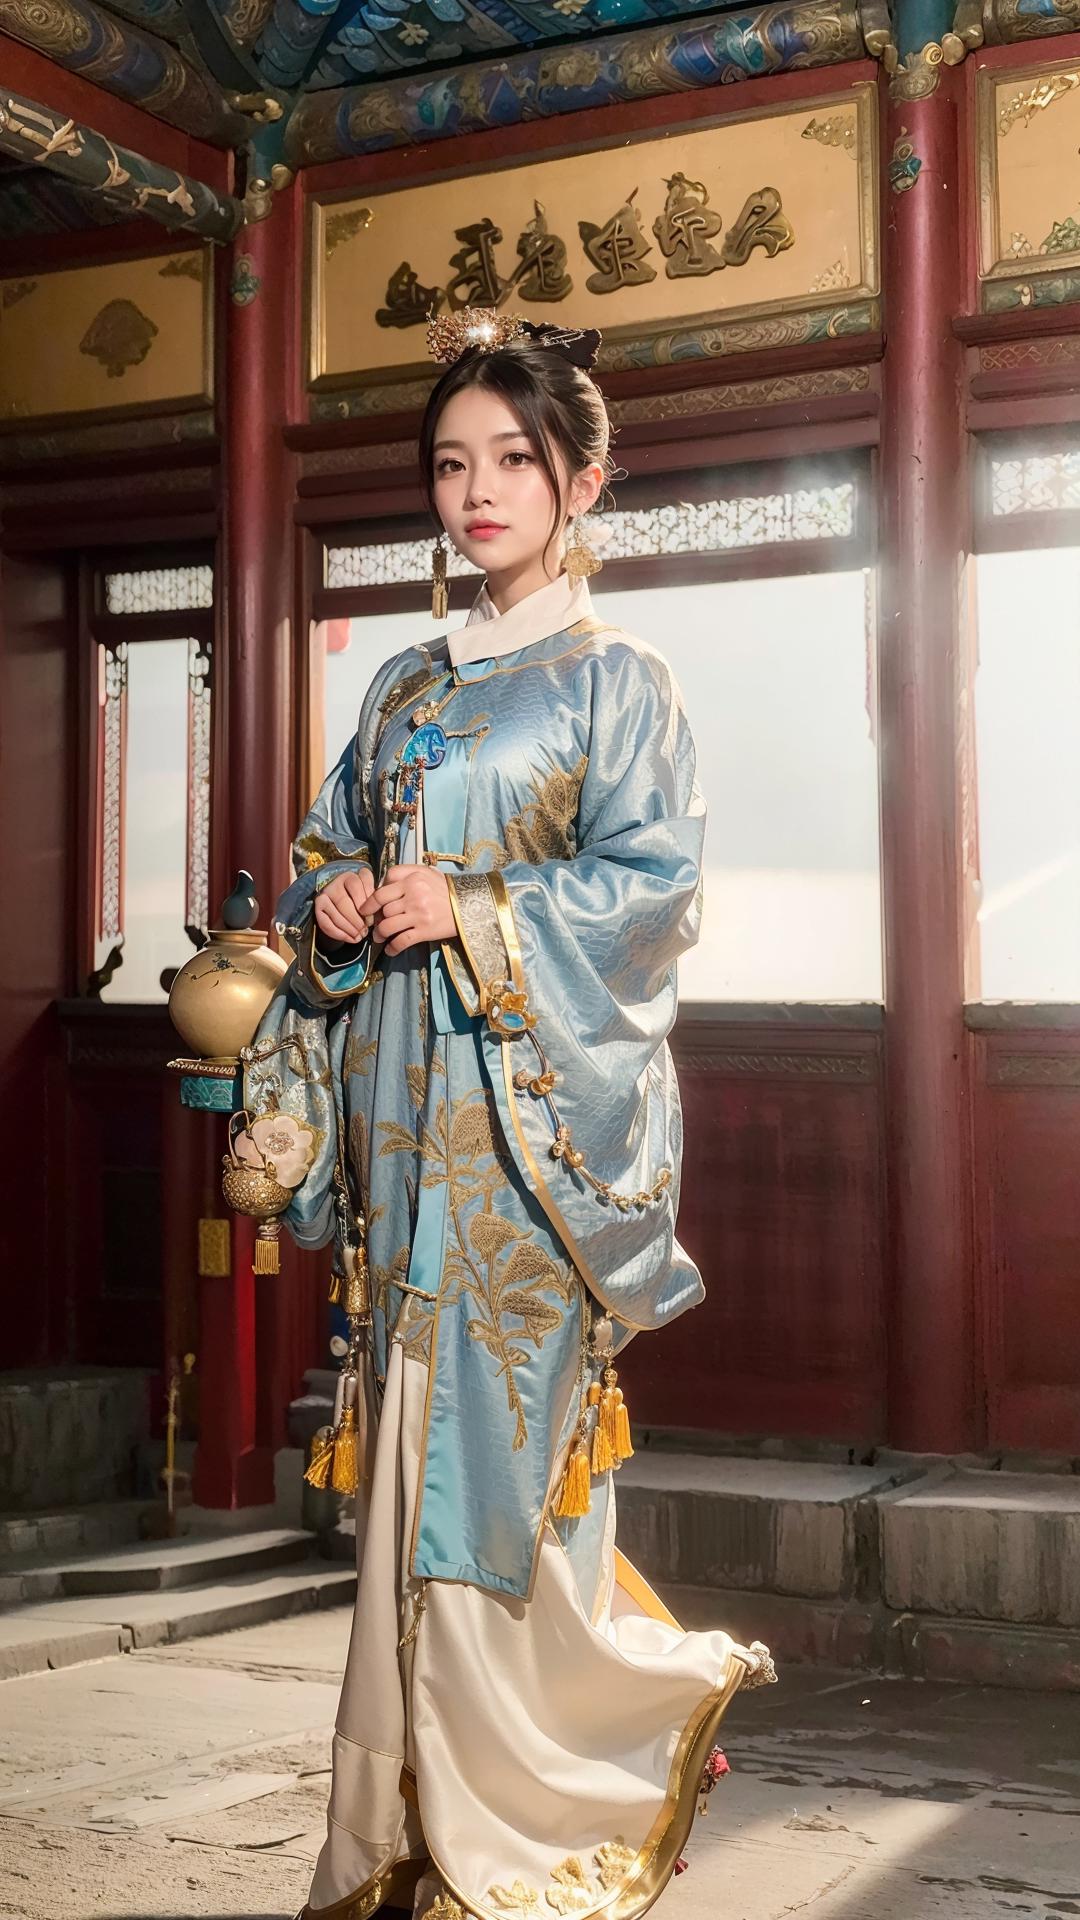 Qing Period Dresses - 清代后宫服 image by AILittlePainter